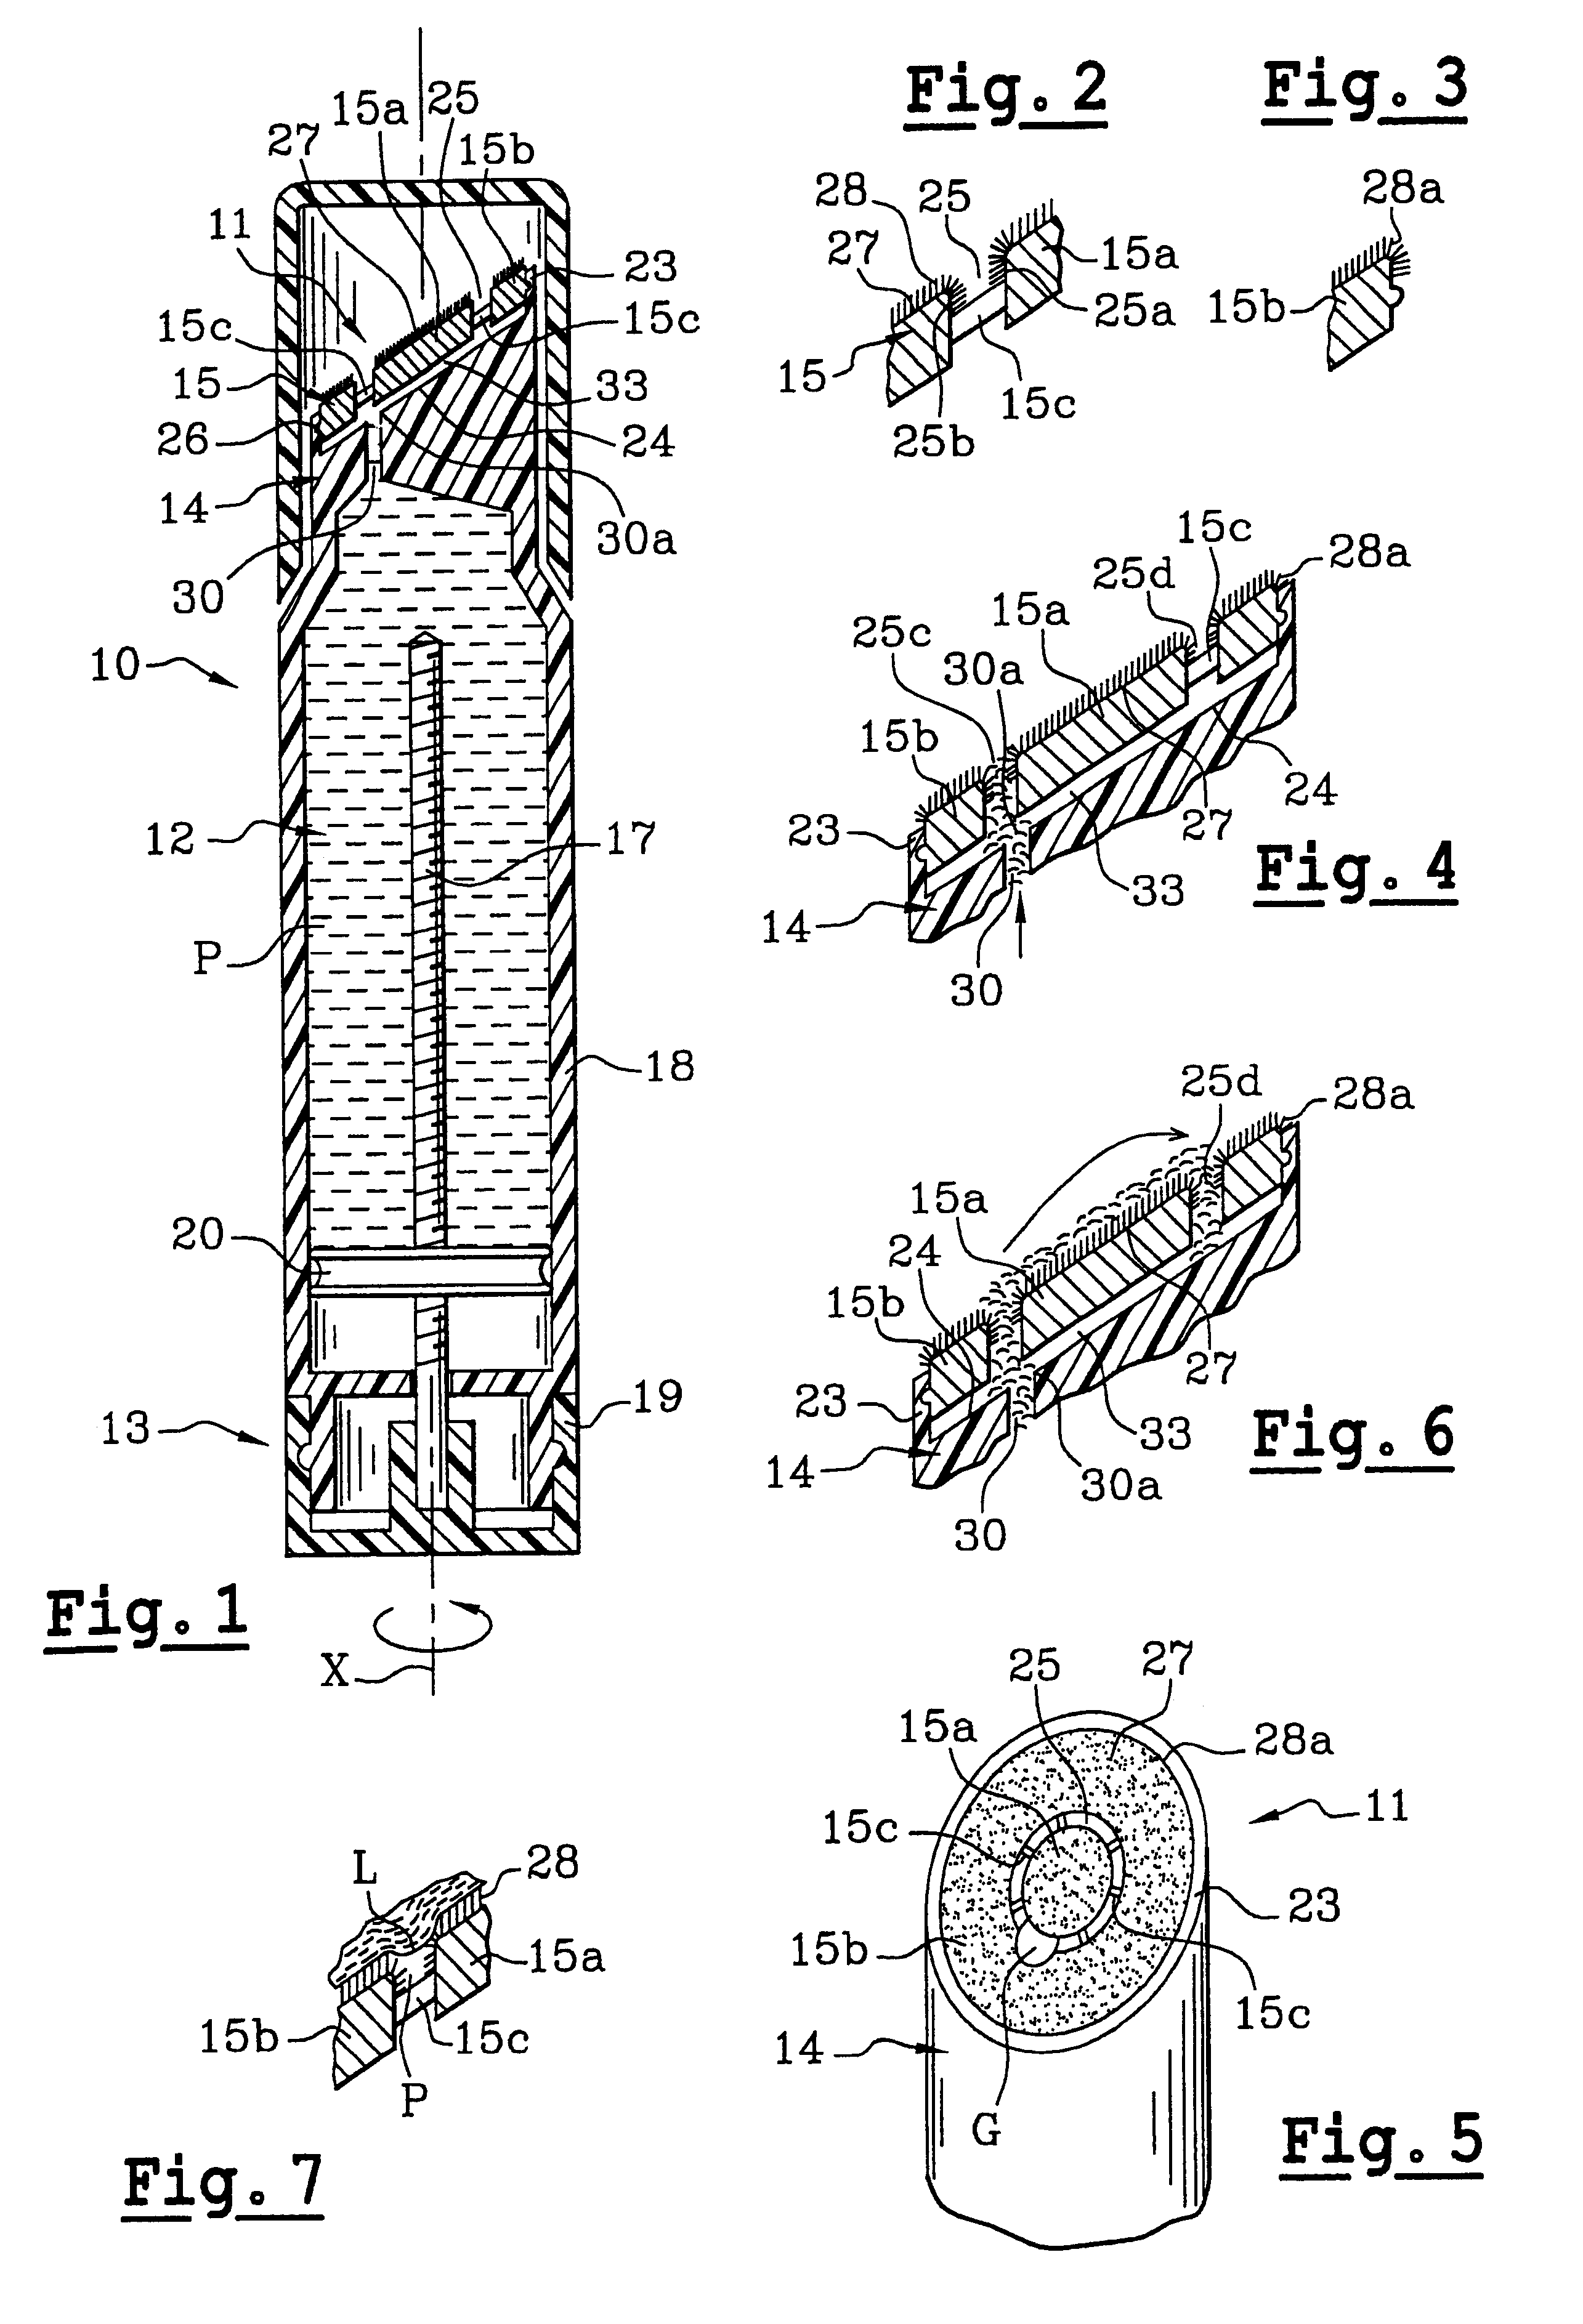 Dispenser endpiece comprising two assembled-together parts and a coating of flocking